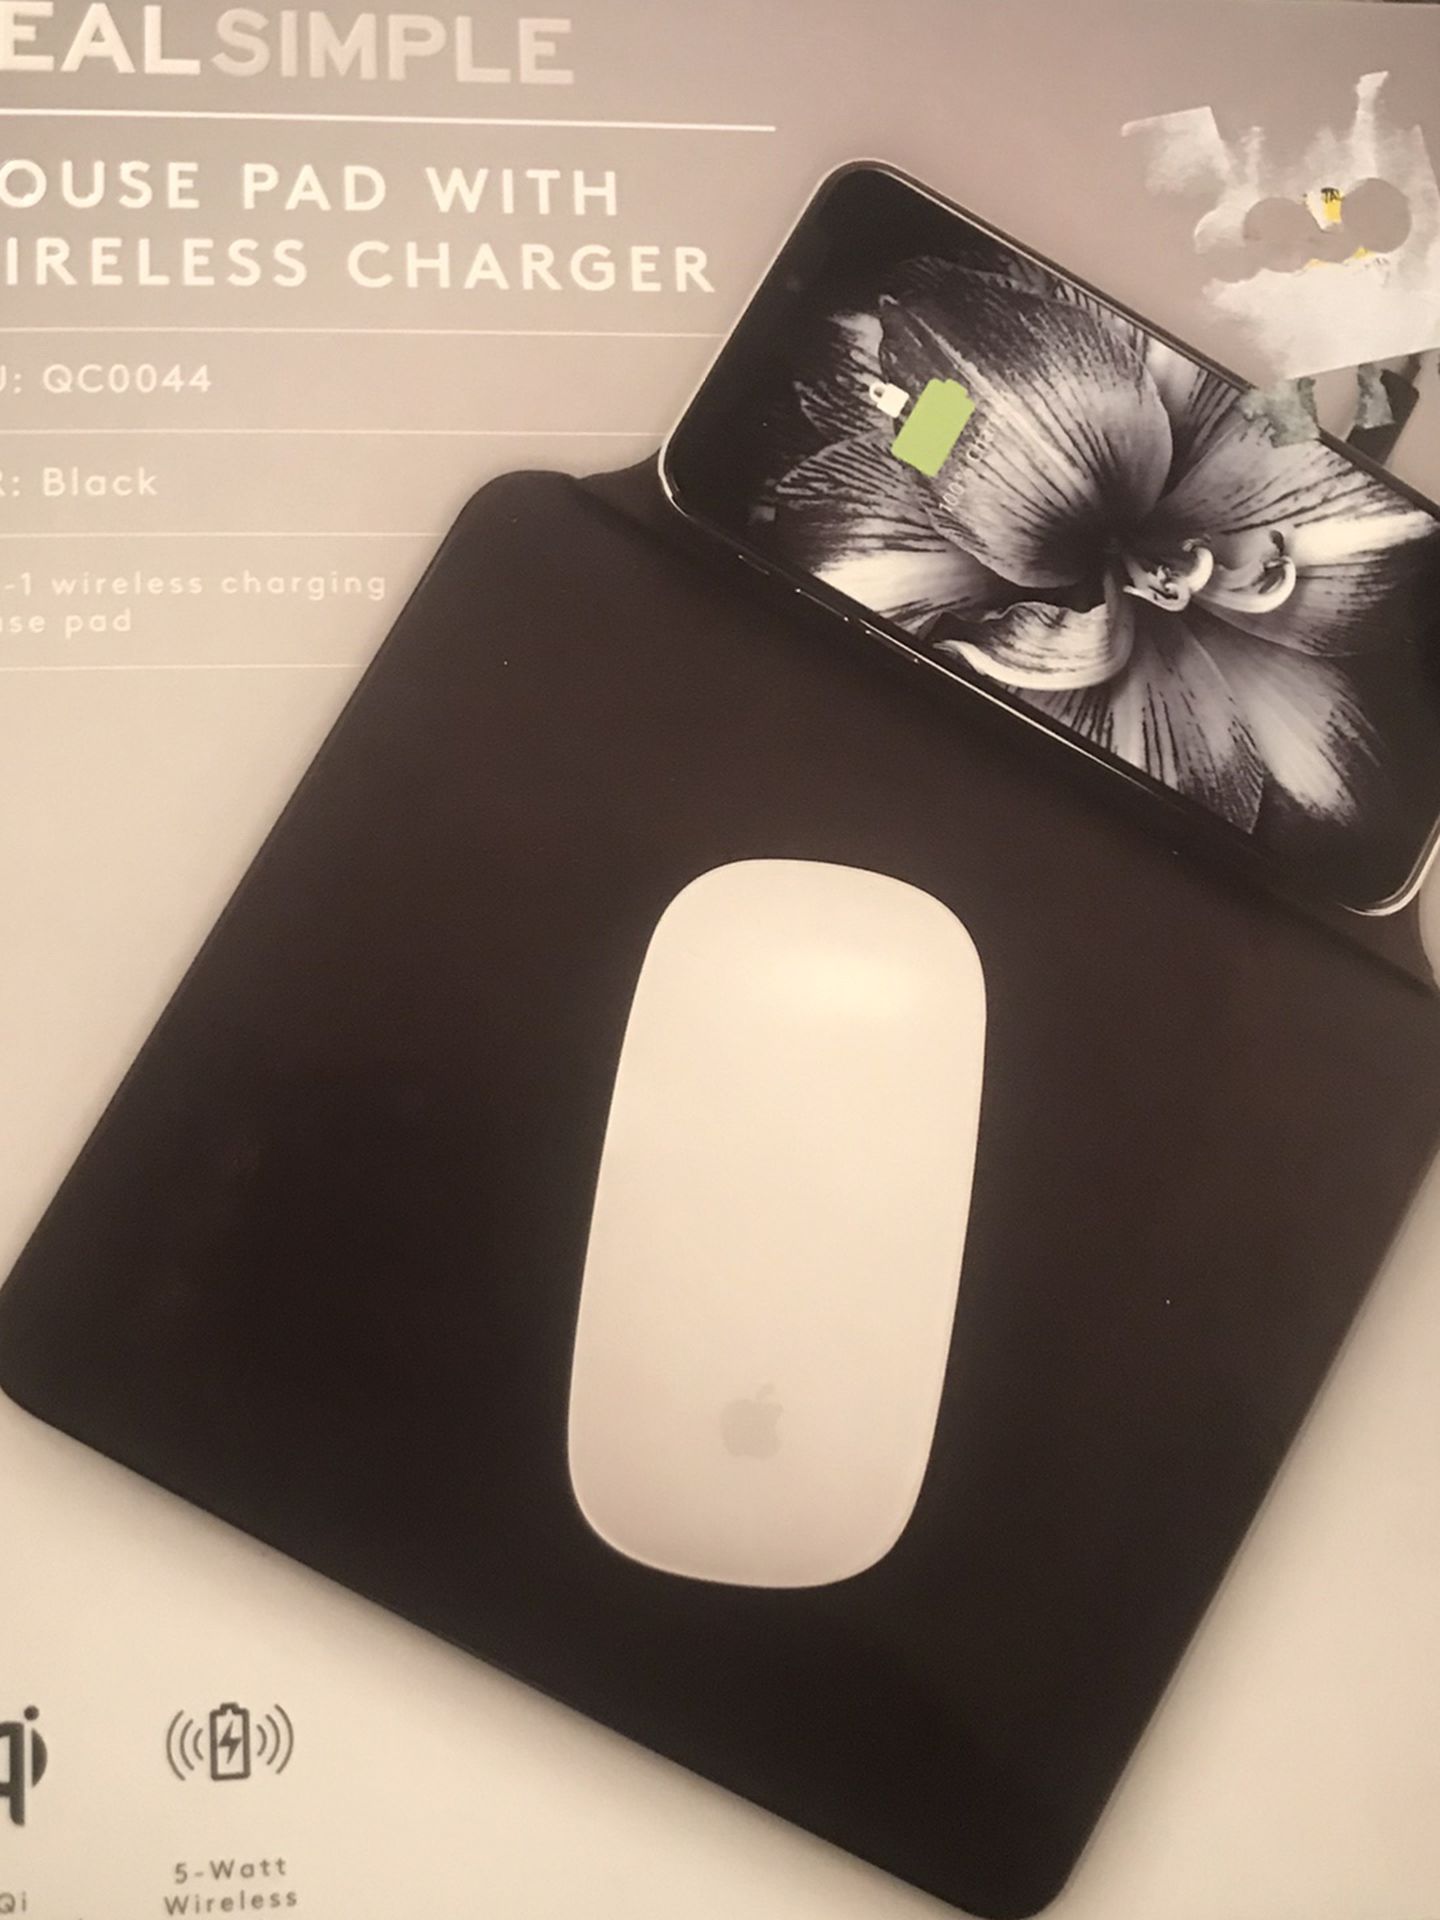 MOUSE PAD WITH WIRELESS CHARGER